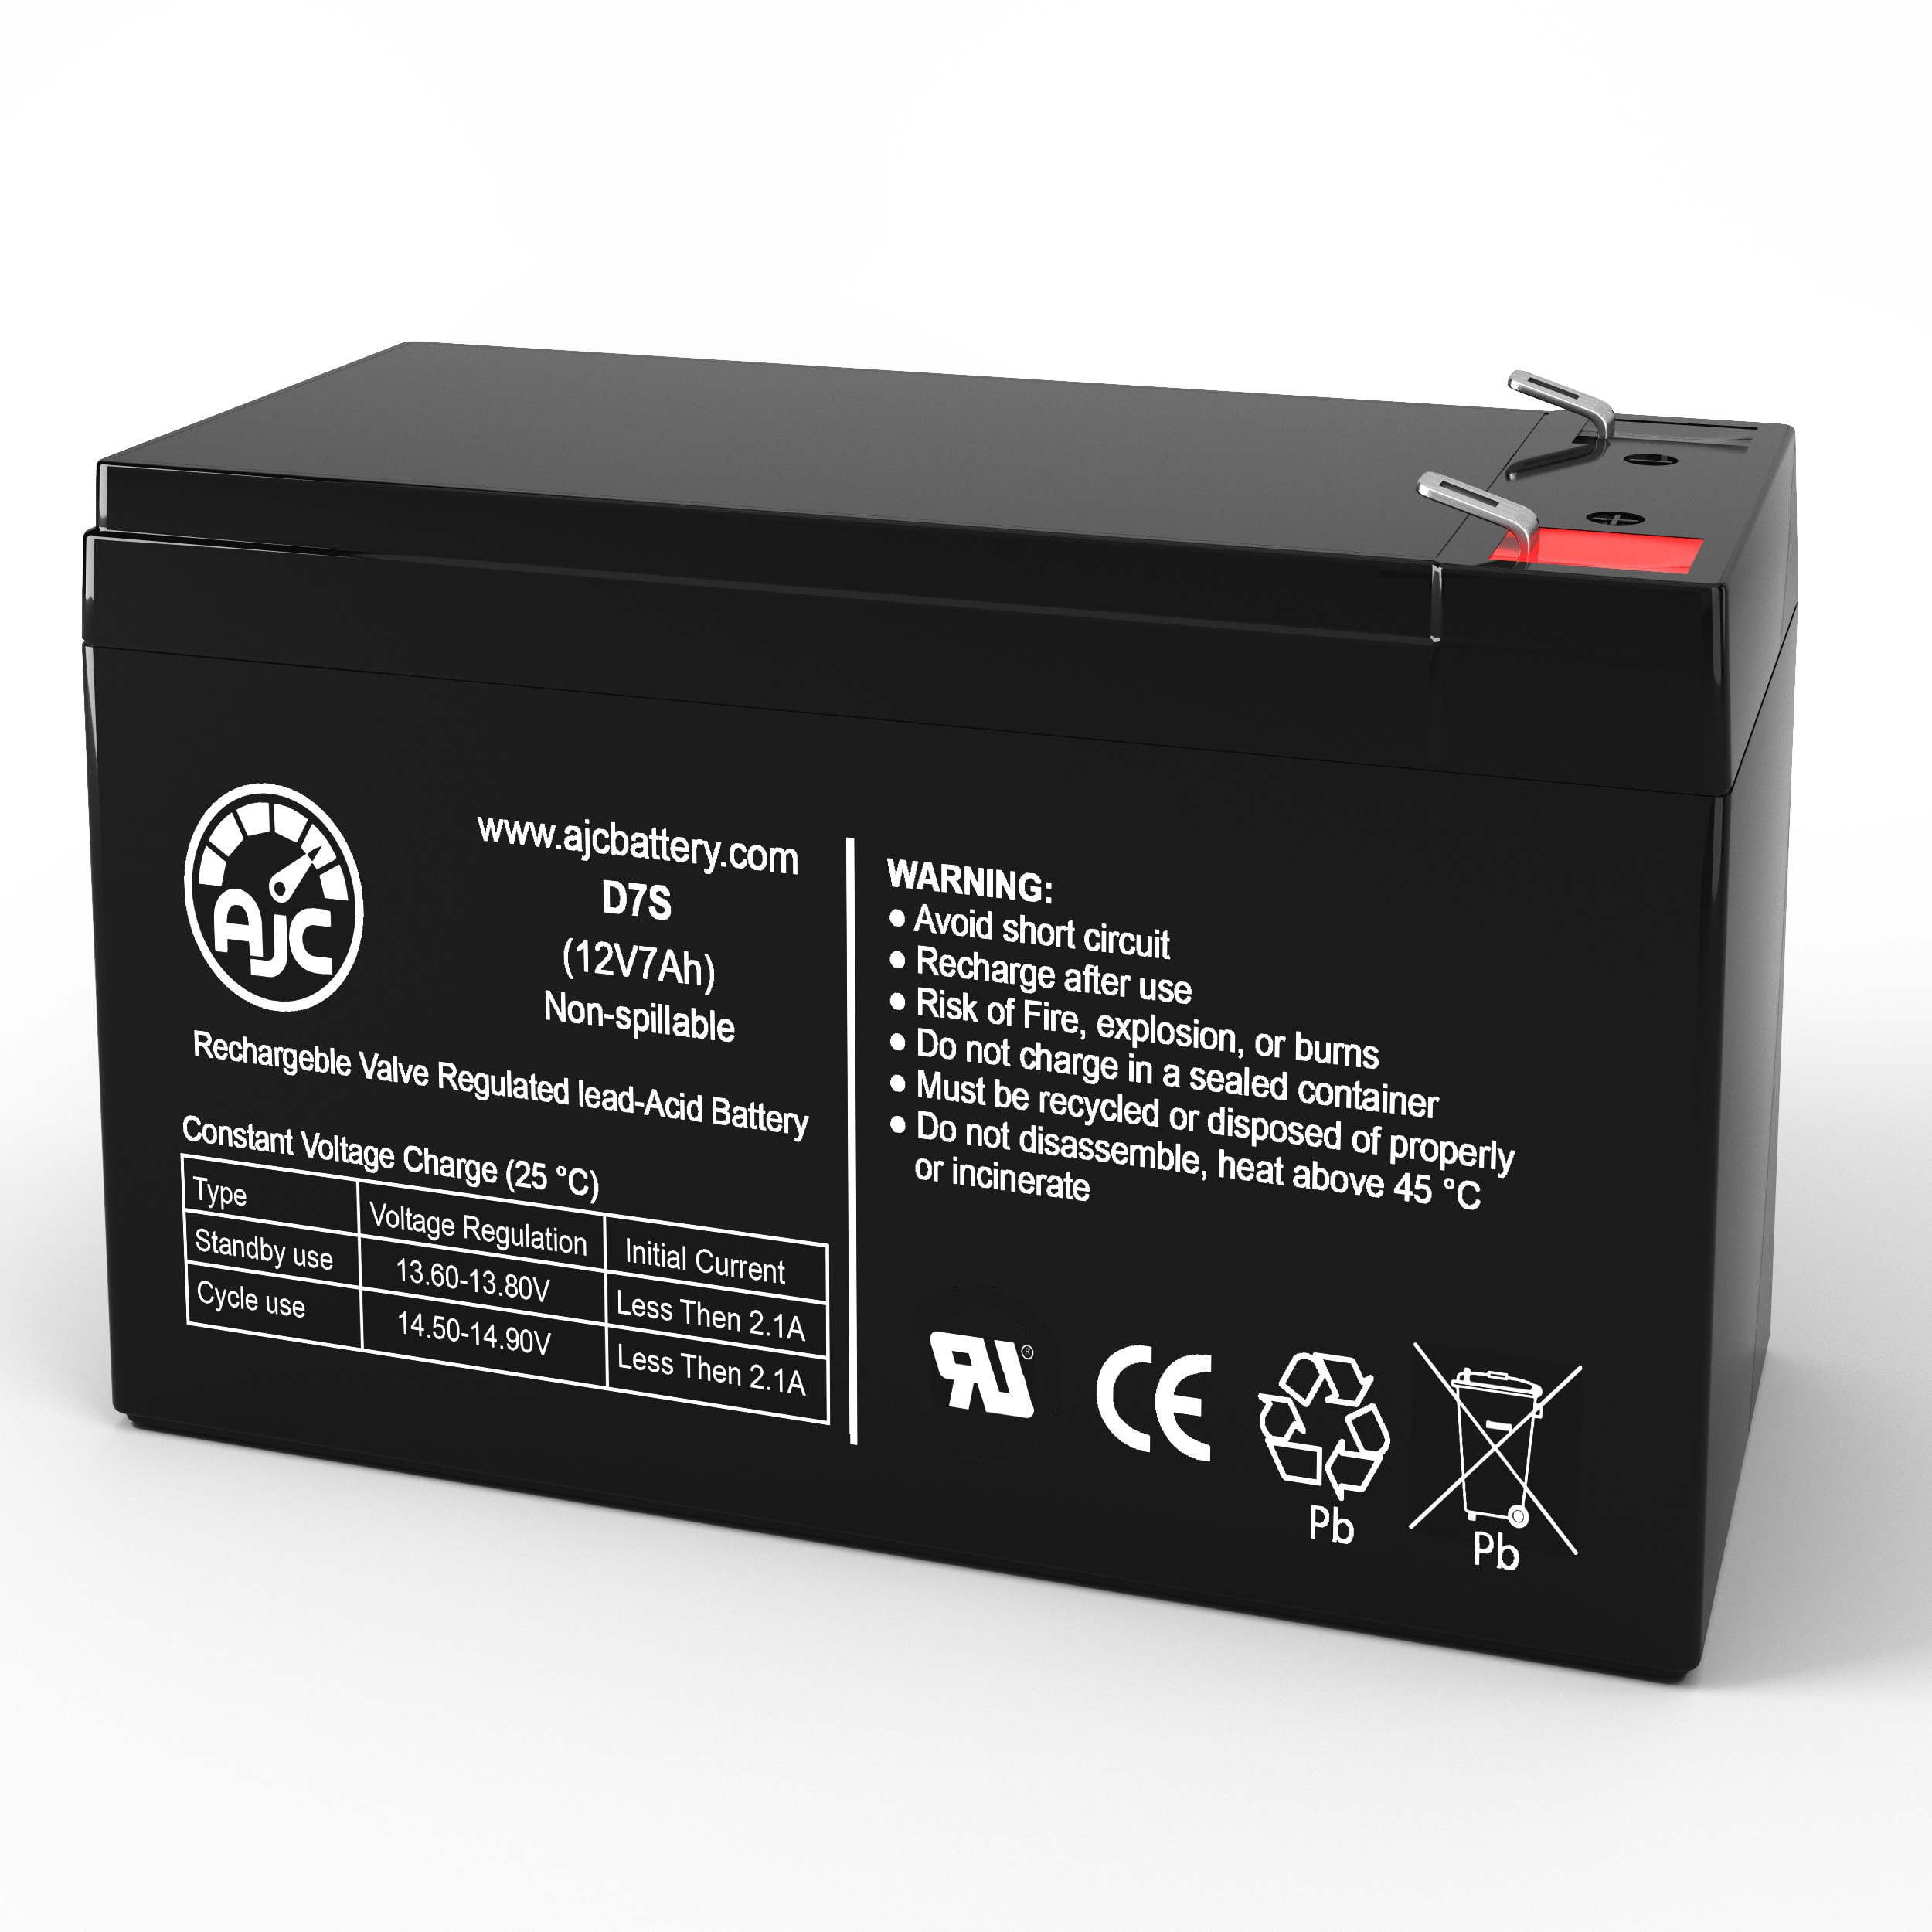 This is an AJC Brand Replacement Digital Security BD 712 12V 7Ah Alarm Battery 